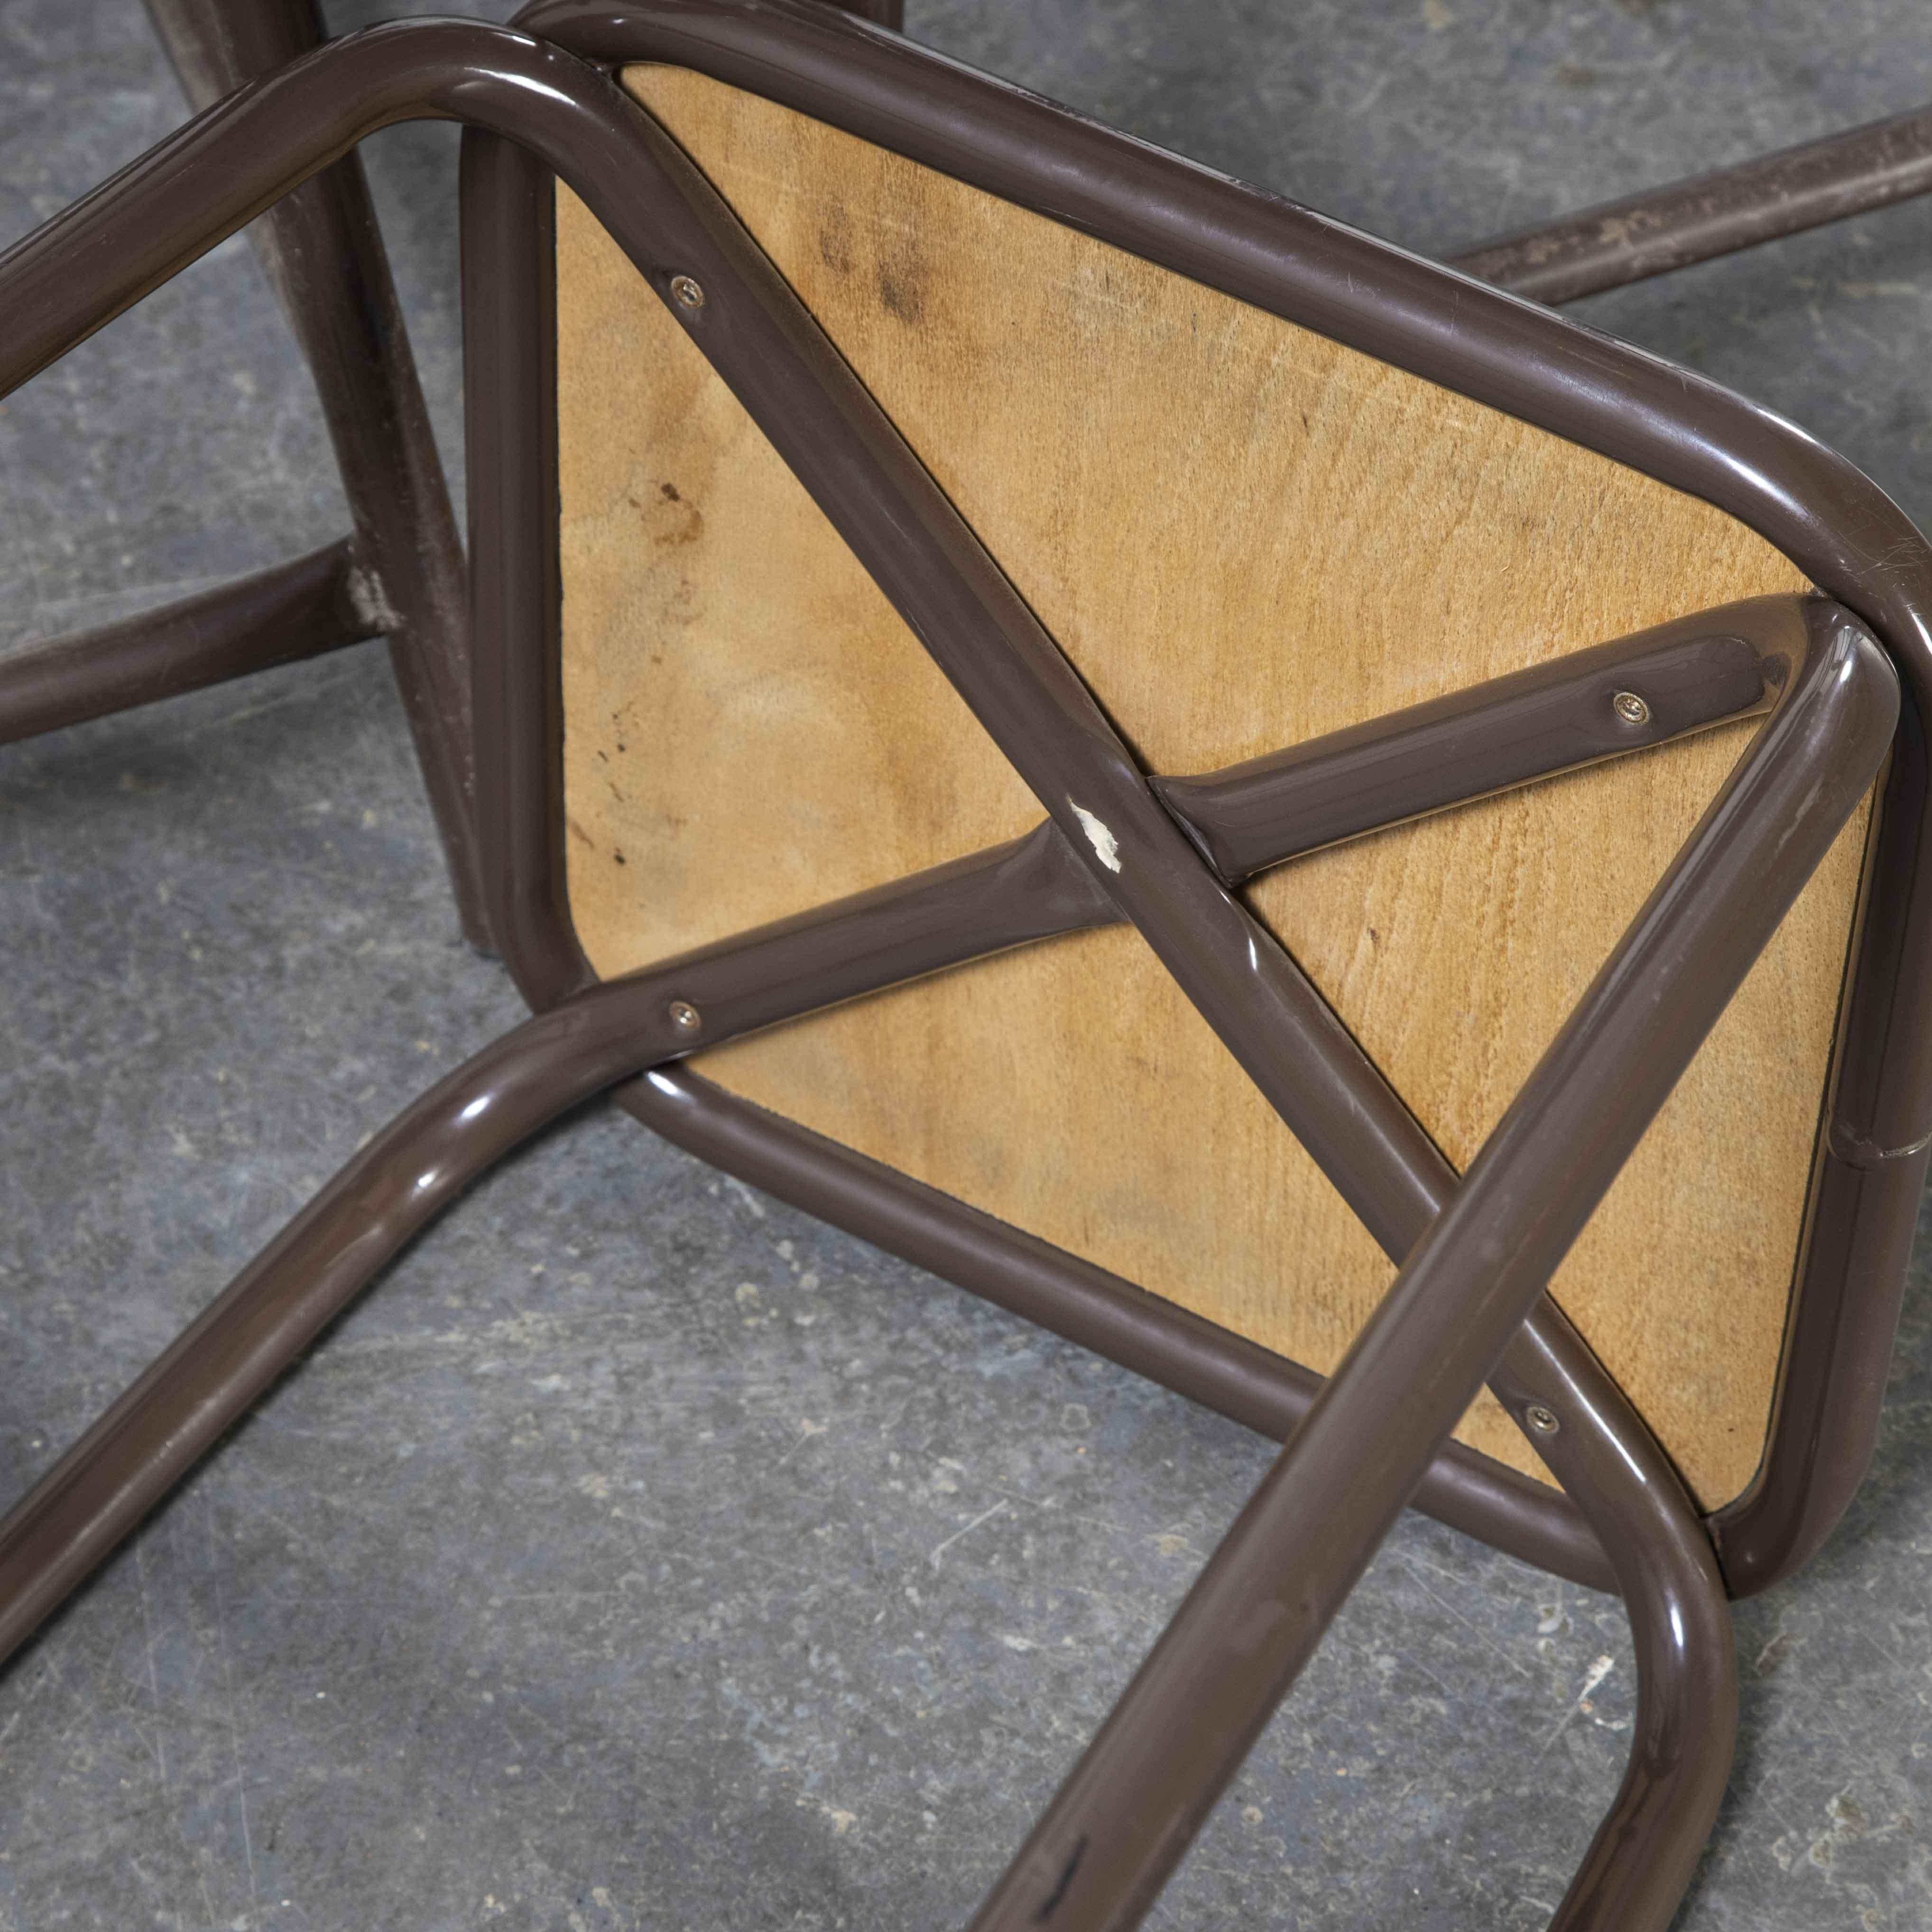 1970s French chocolate brown laboratory stools – set of seven

1970s French chocolate brown laboratory stools – set of seven. Good honest lab stools, heavy steel frames with solid heavy birch ply seats. We clean them and check all fixings, they